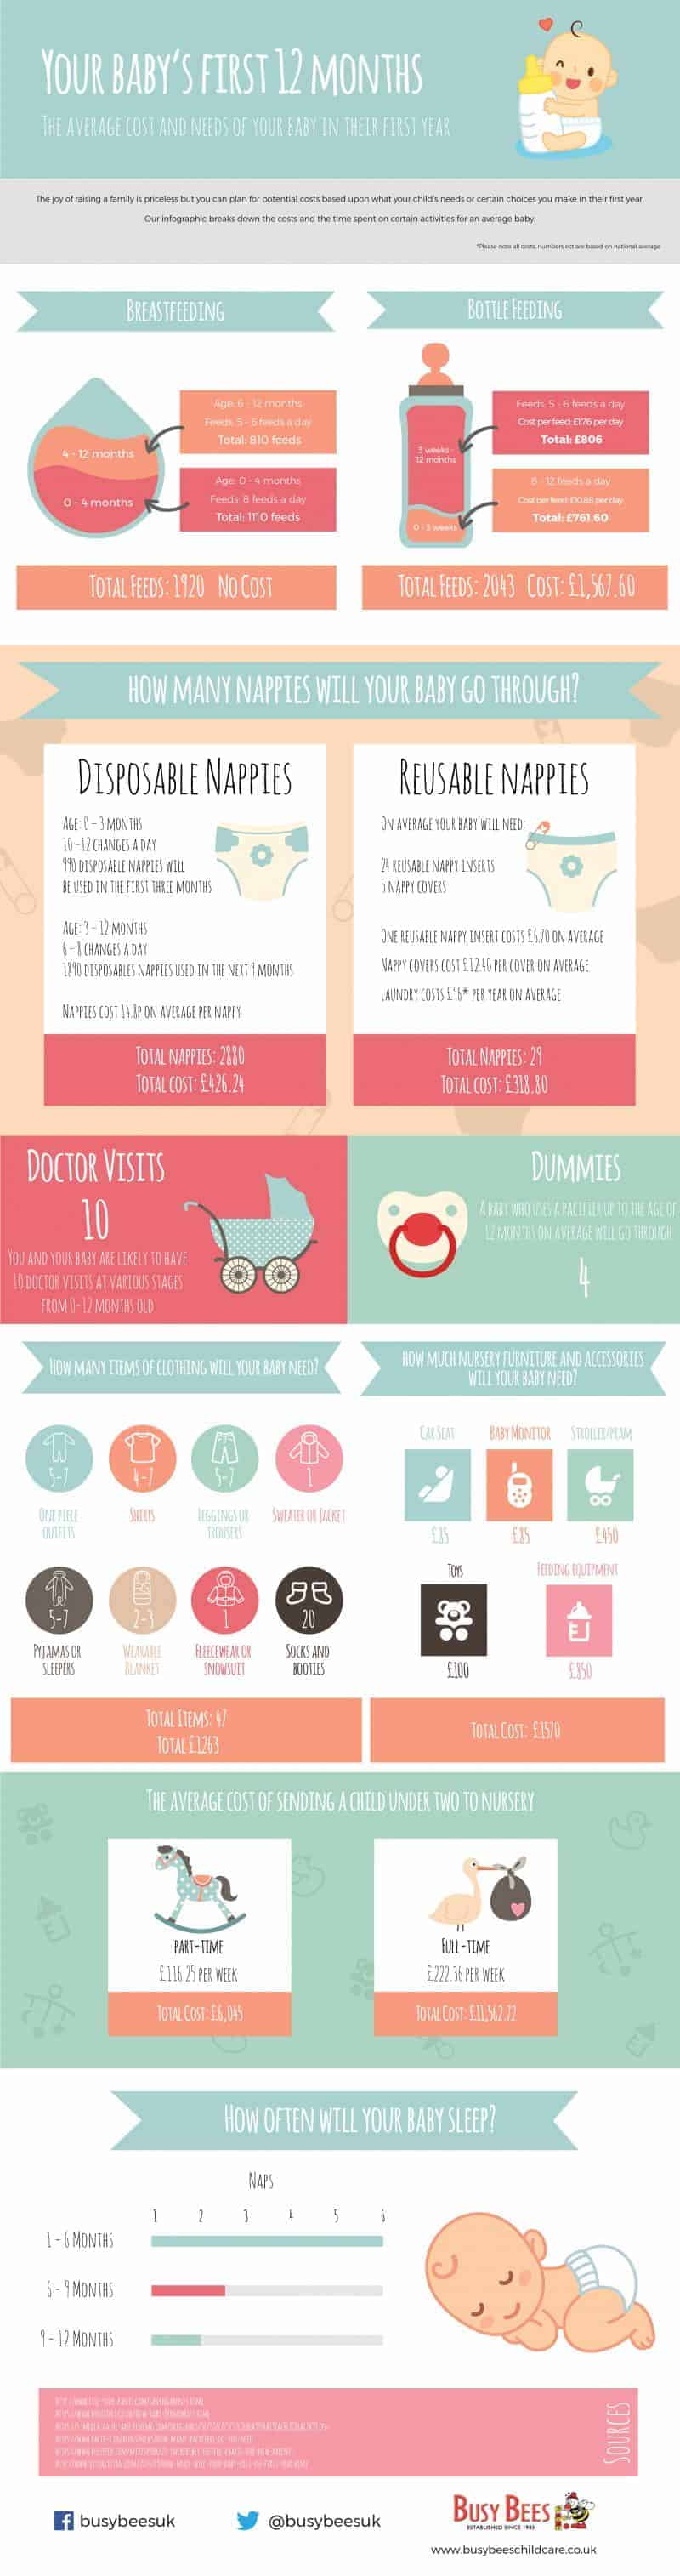 Cost of Baby's First Year